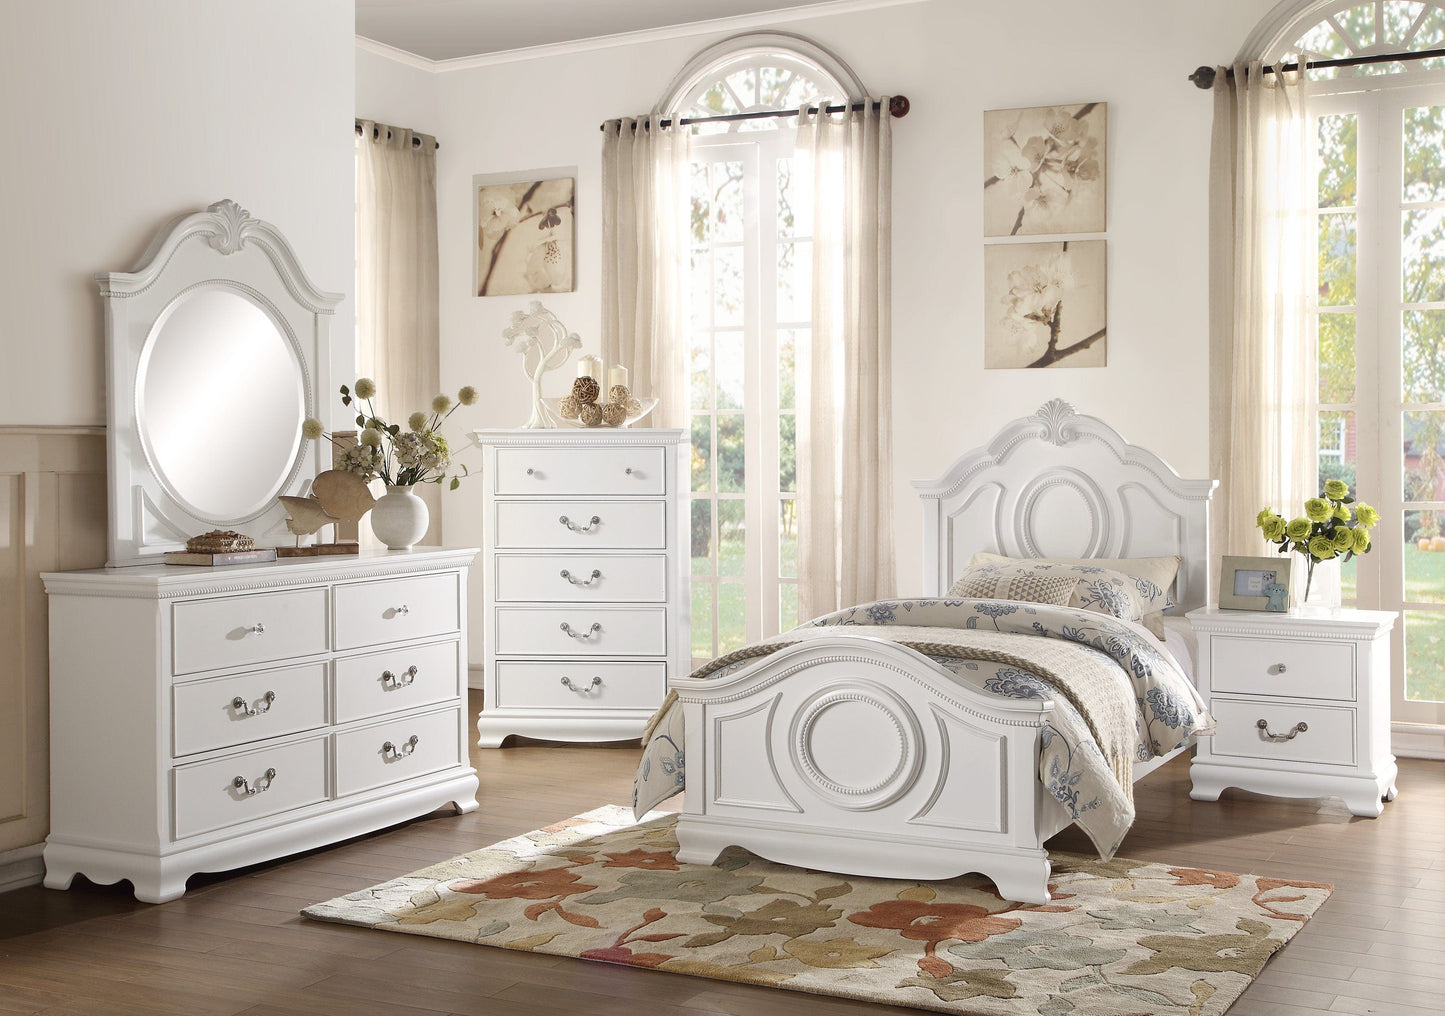 Classic Traditional Style Dresser of 6x Drawers White Finish Bedroom Antique Handles Wooden Furniture